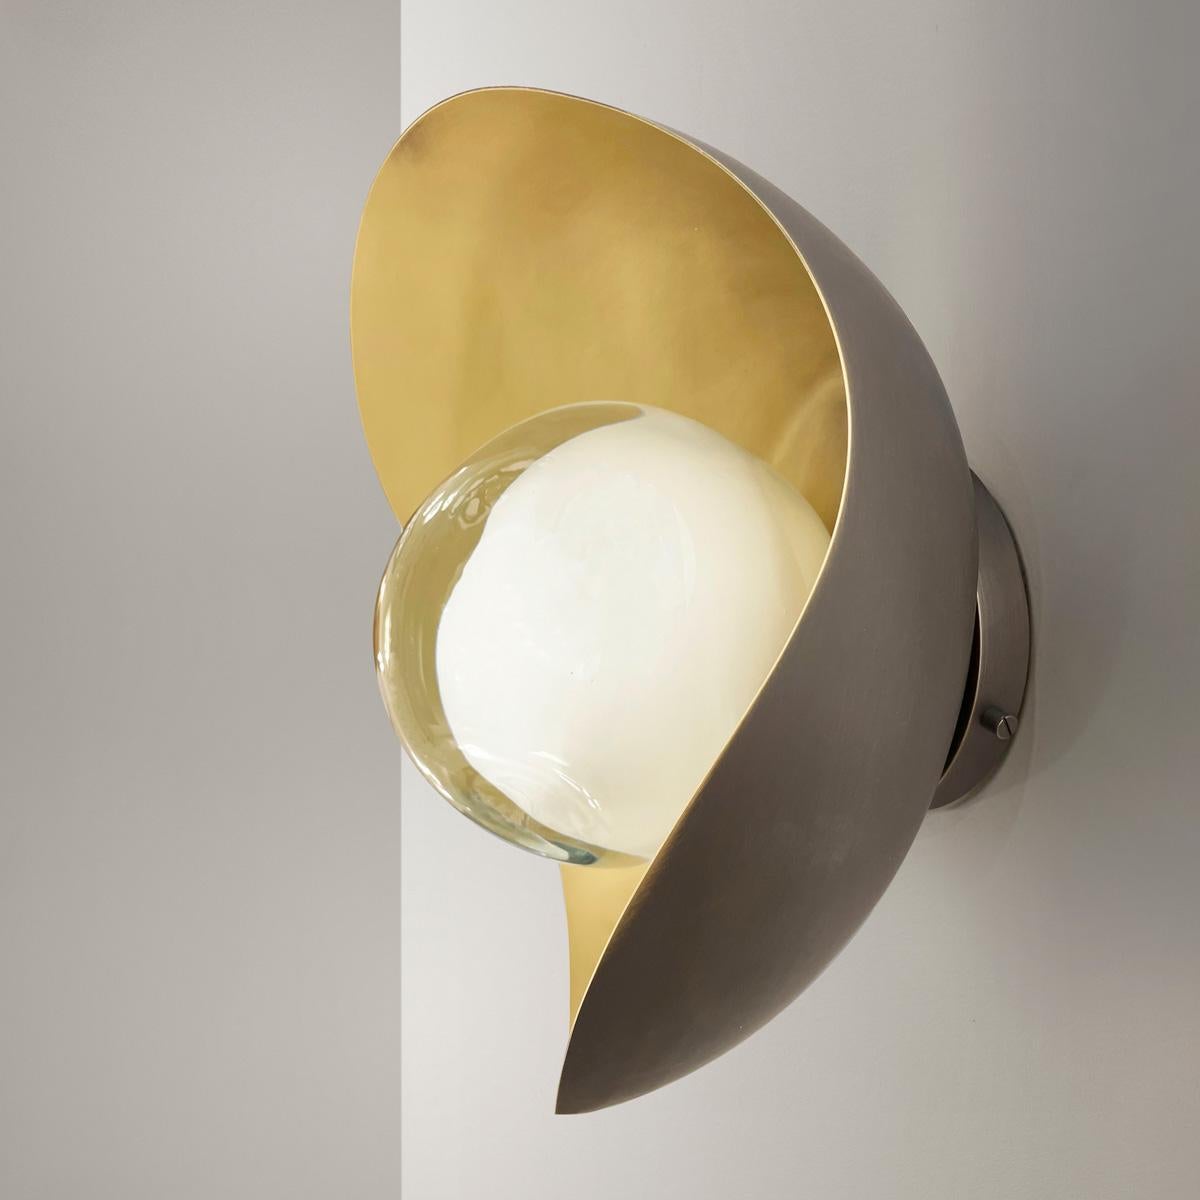 Contemporary Perla Wall Light by Gaspare Asaro-Brass Finish For Sale